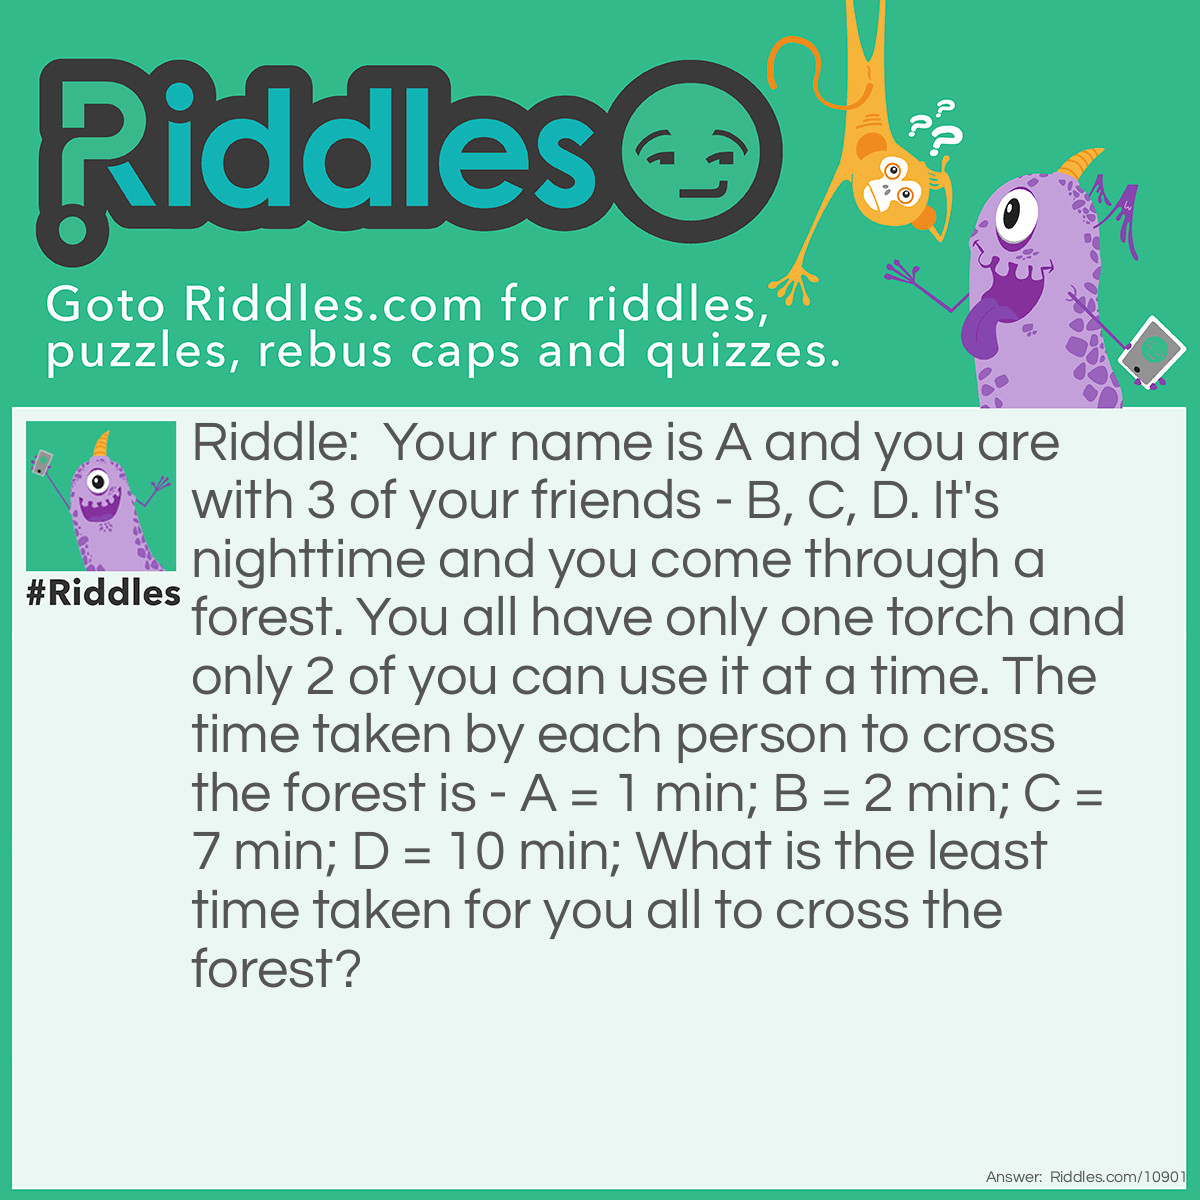 Riddle: Your name is A and you are with 3 of your friends - B, C, D. It's nighttime and you come through a forest. You all have only one torch and only 2 of you can use it at a time. The time taken by each person to cross the forest is - A = 1 min; B = 2 min; C = 7 min; D = 10 min; What is the least time taken for you all to cross the forest? Answer: AB = 2 min (go to the end); A = 1 min (comes back); CD = 10 min (go to the end); B = 2 min (comes back, you came back alone in step 2); AB = 2 min (go to the end); Total = 17 mins.